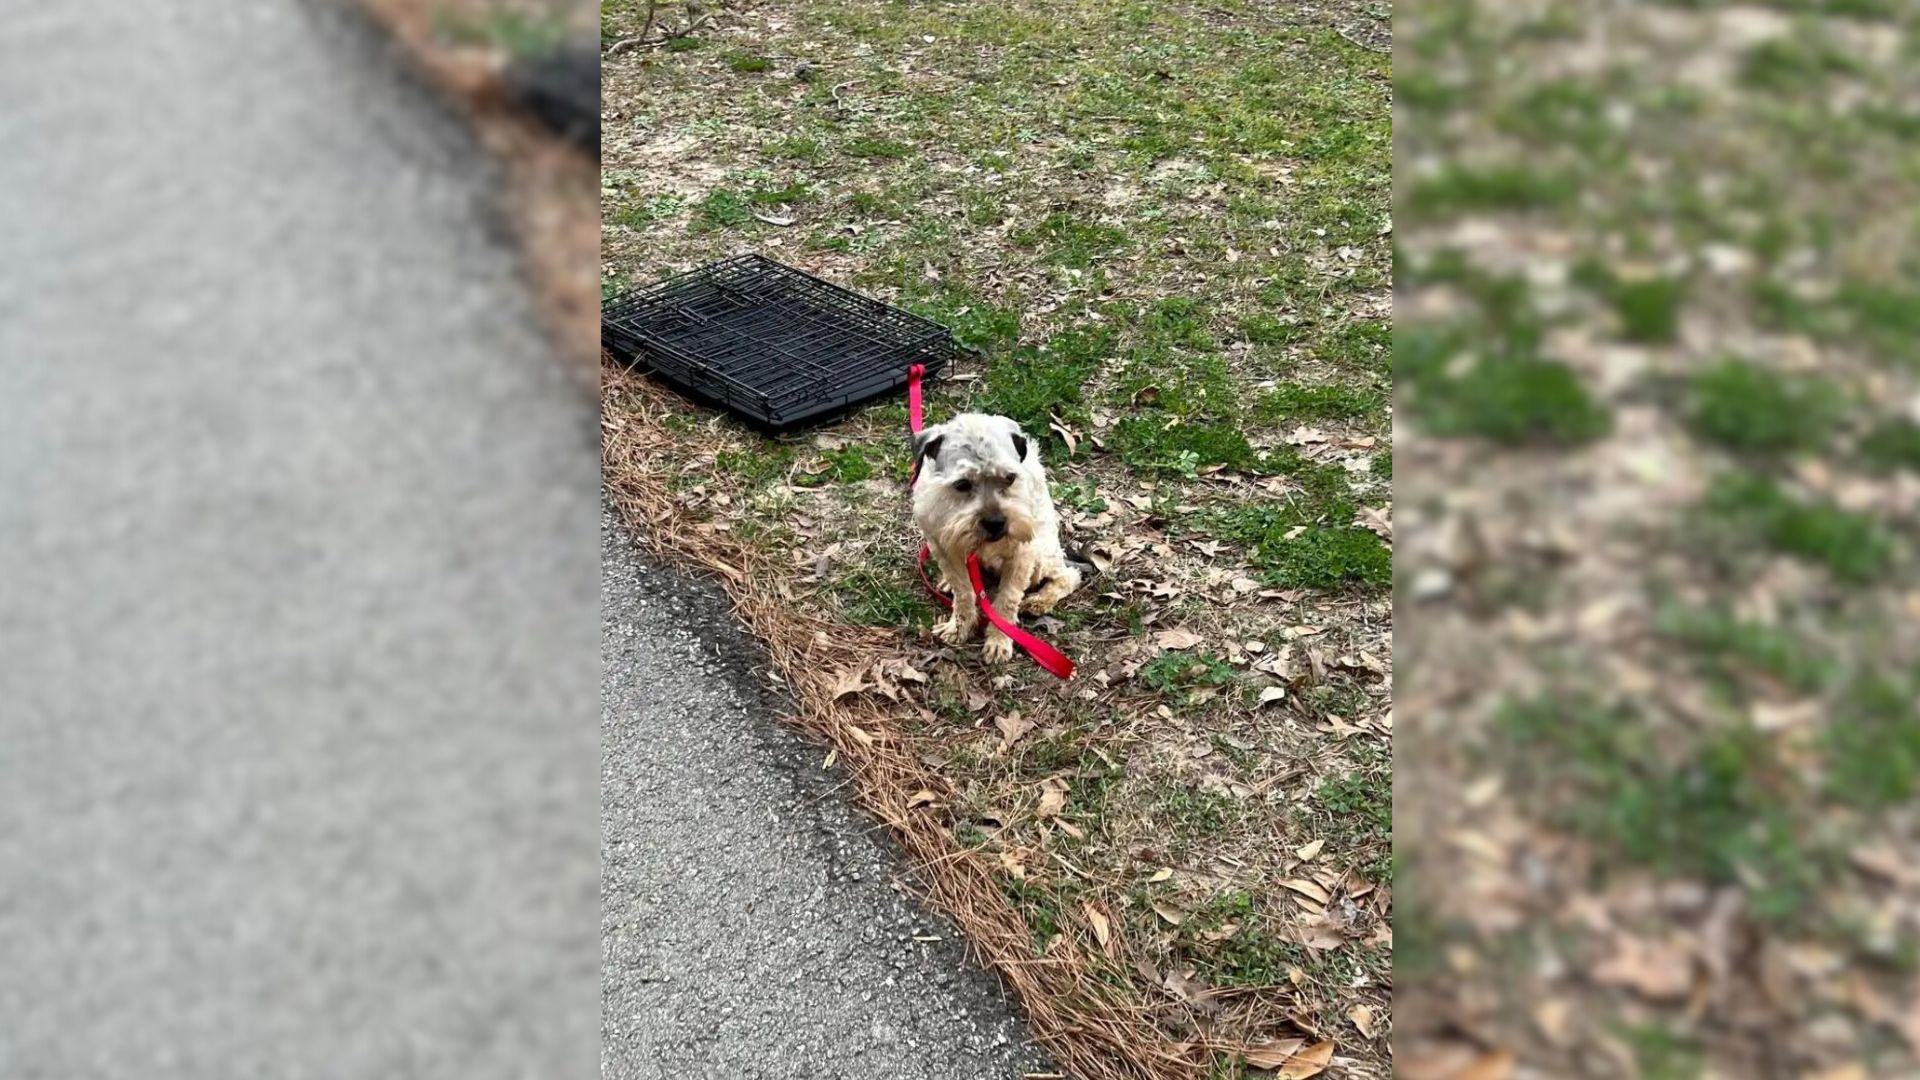 A Woman’s Heart Was Filled With Sorrow After She Spotted A Frightened Pup Tied To A Crate